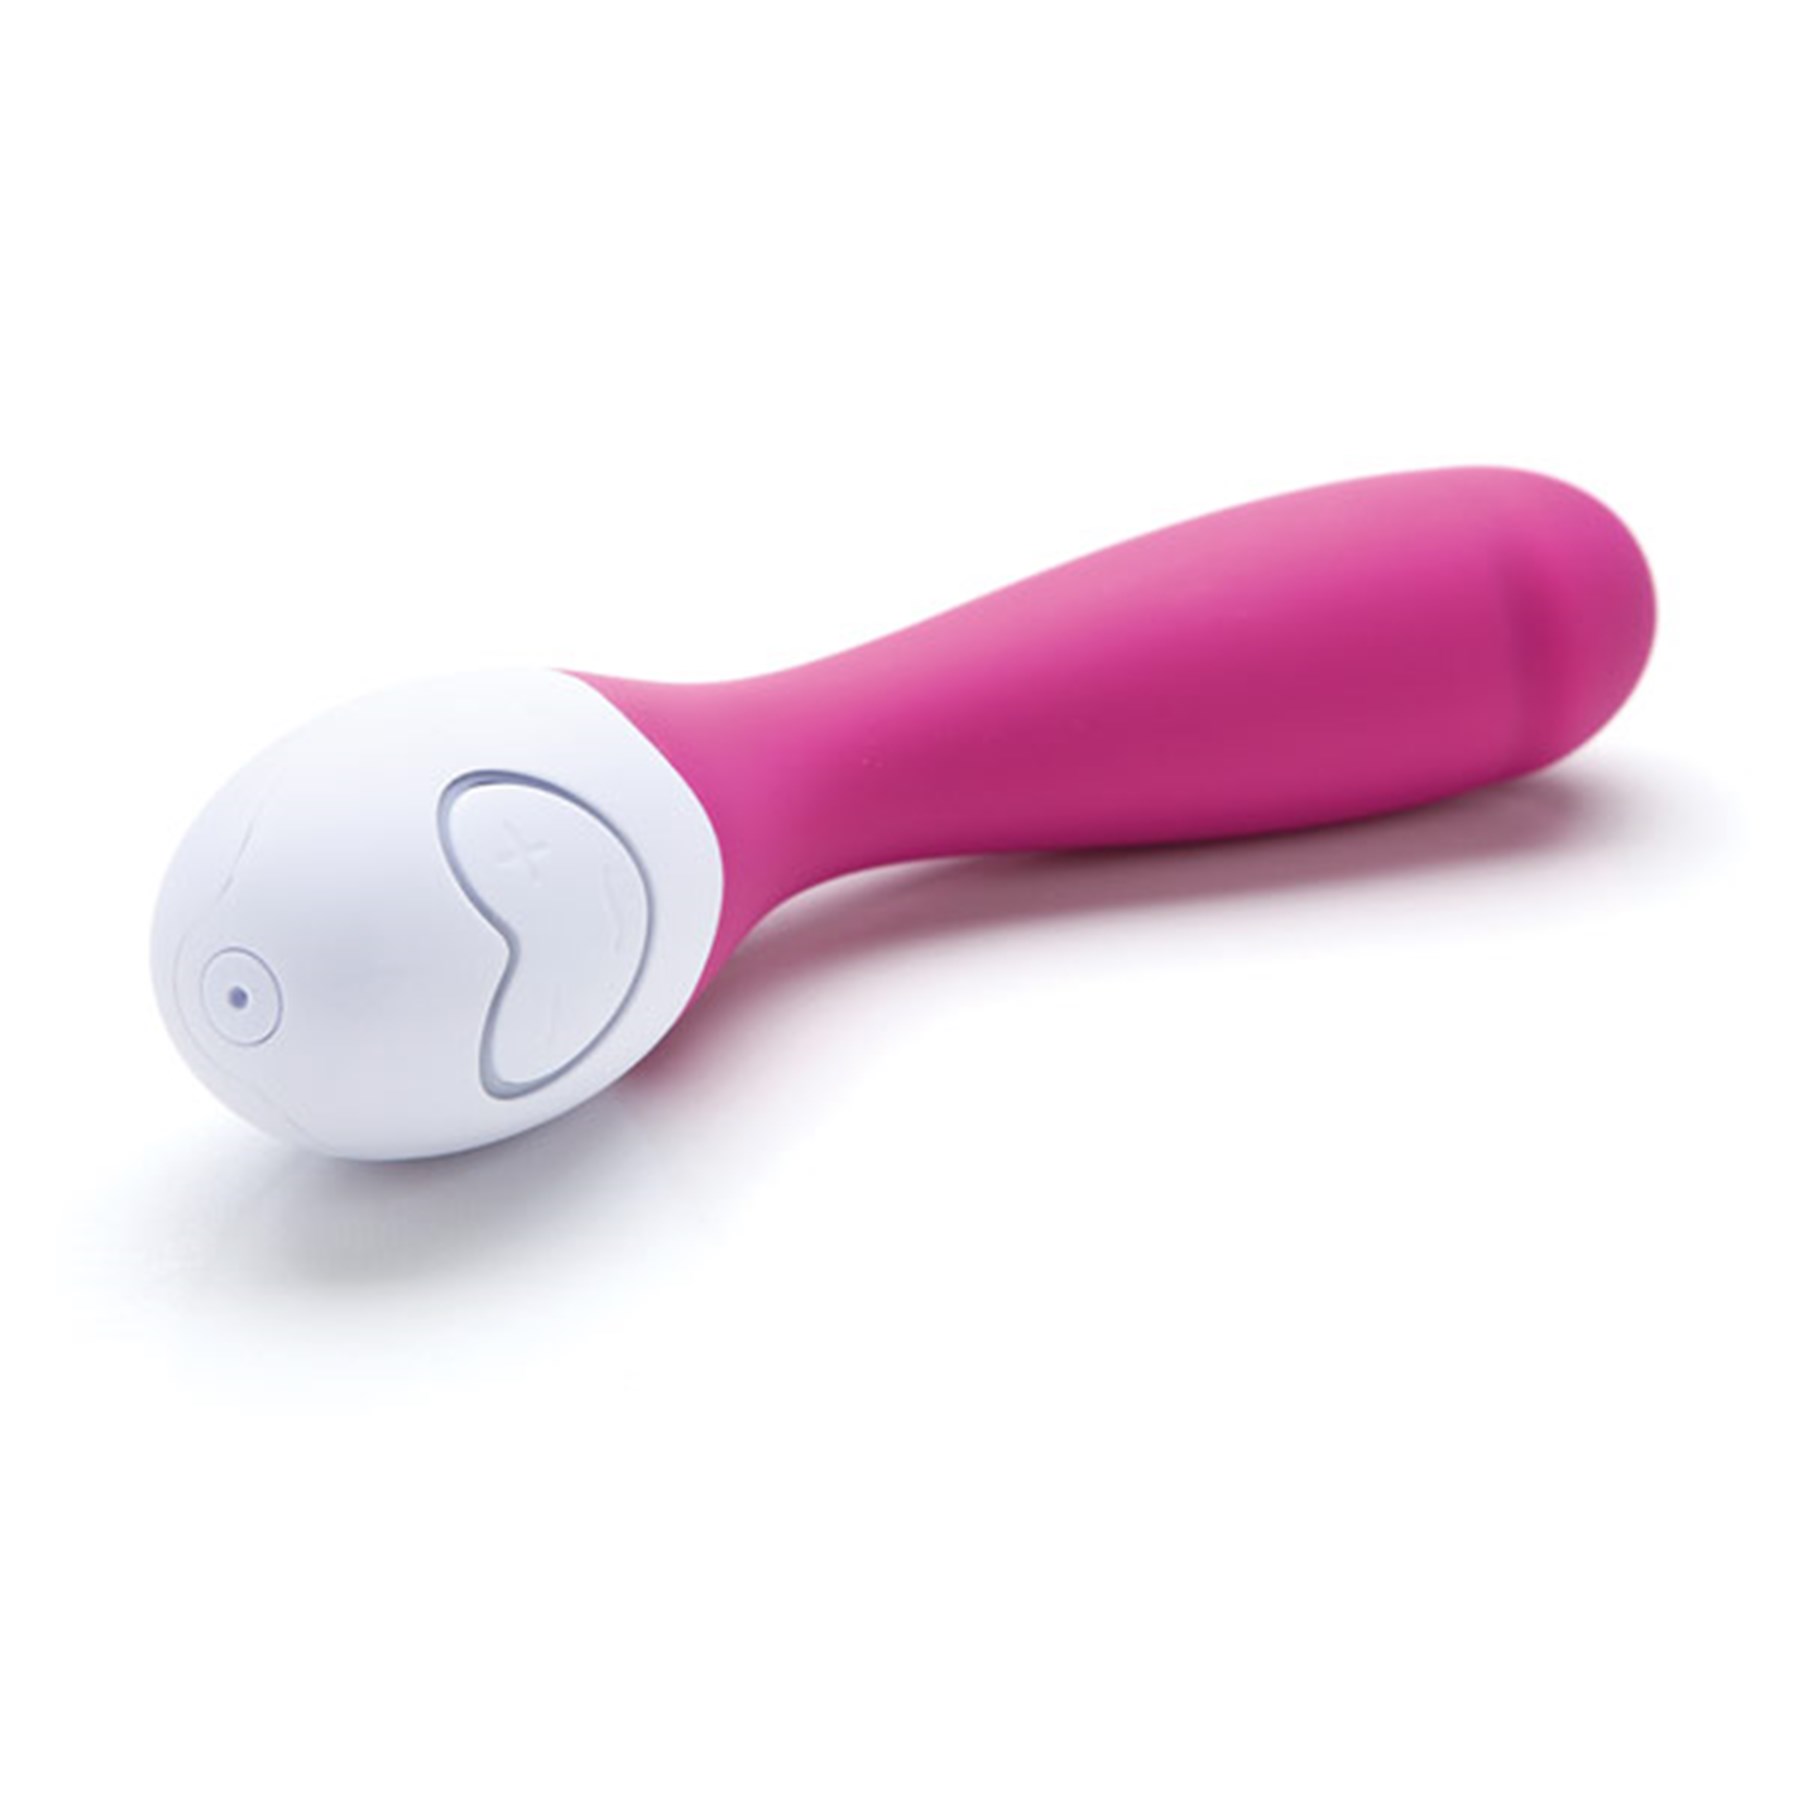 Lovelife Cuddle G-Spot Massager laying on table